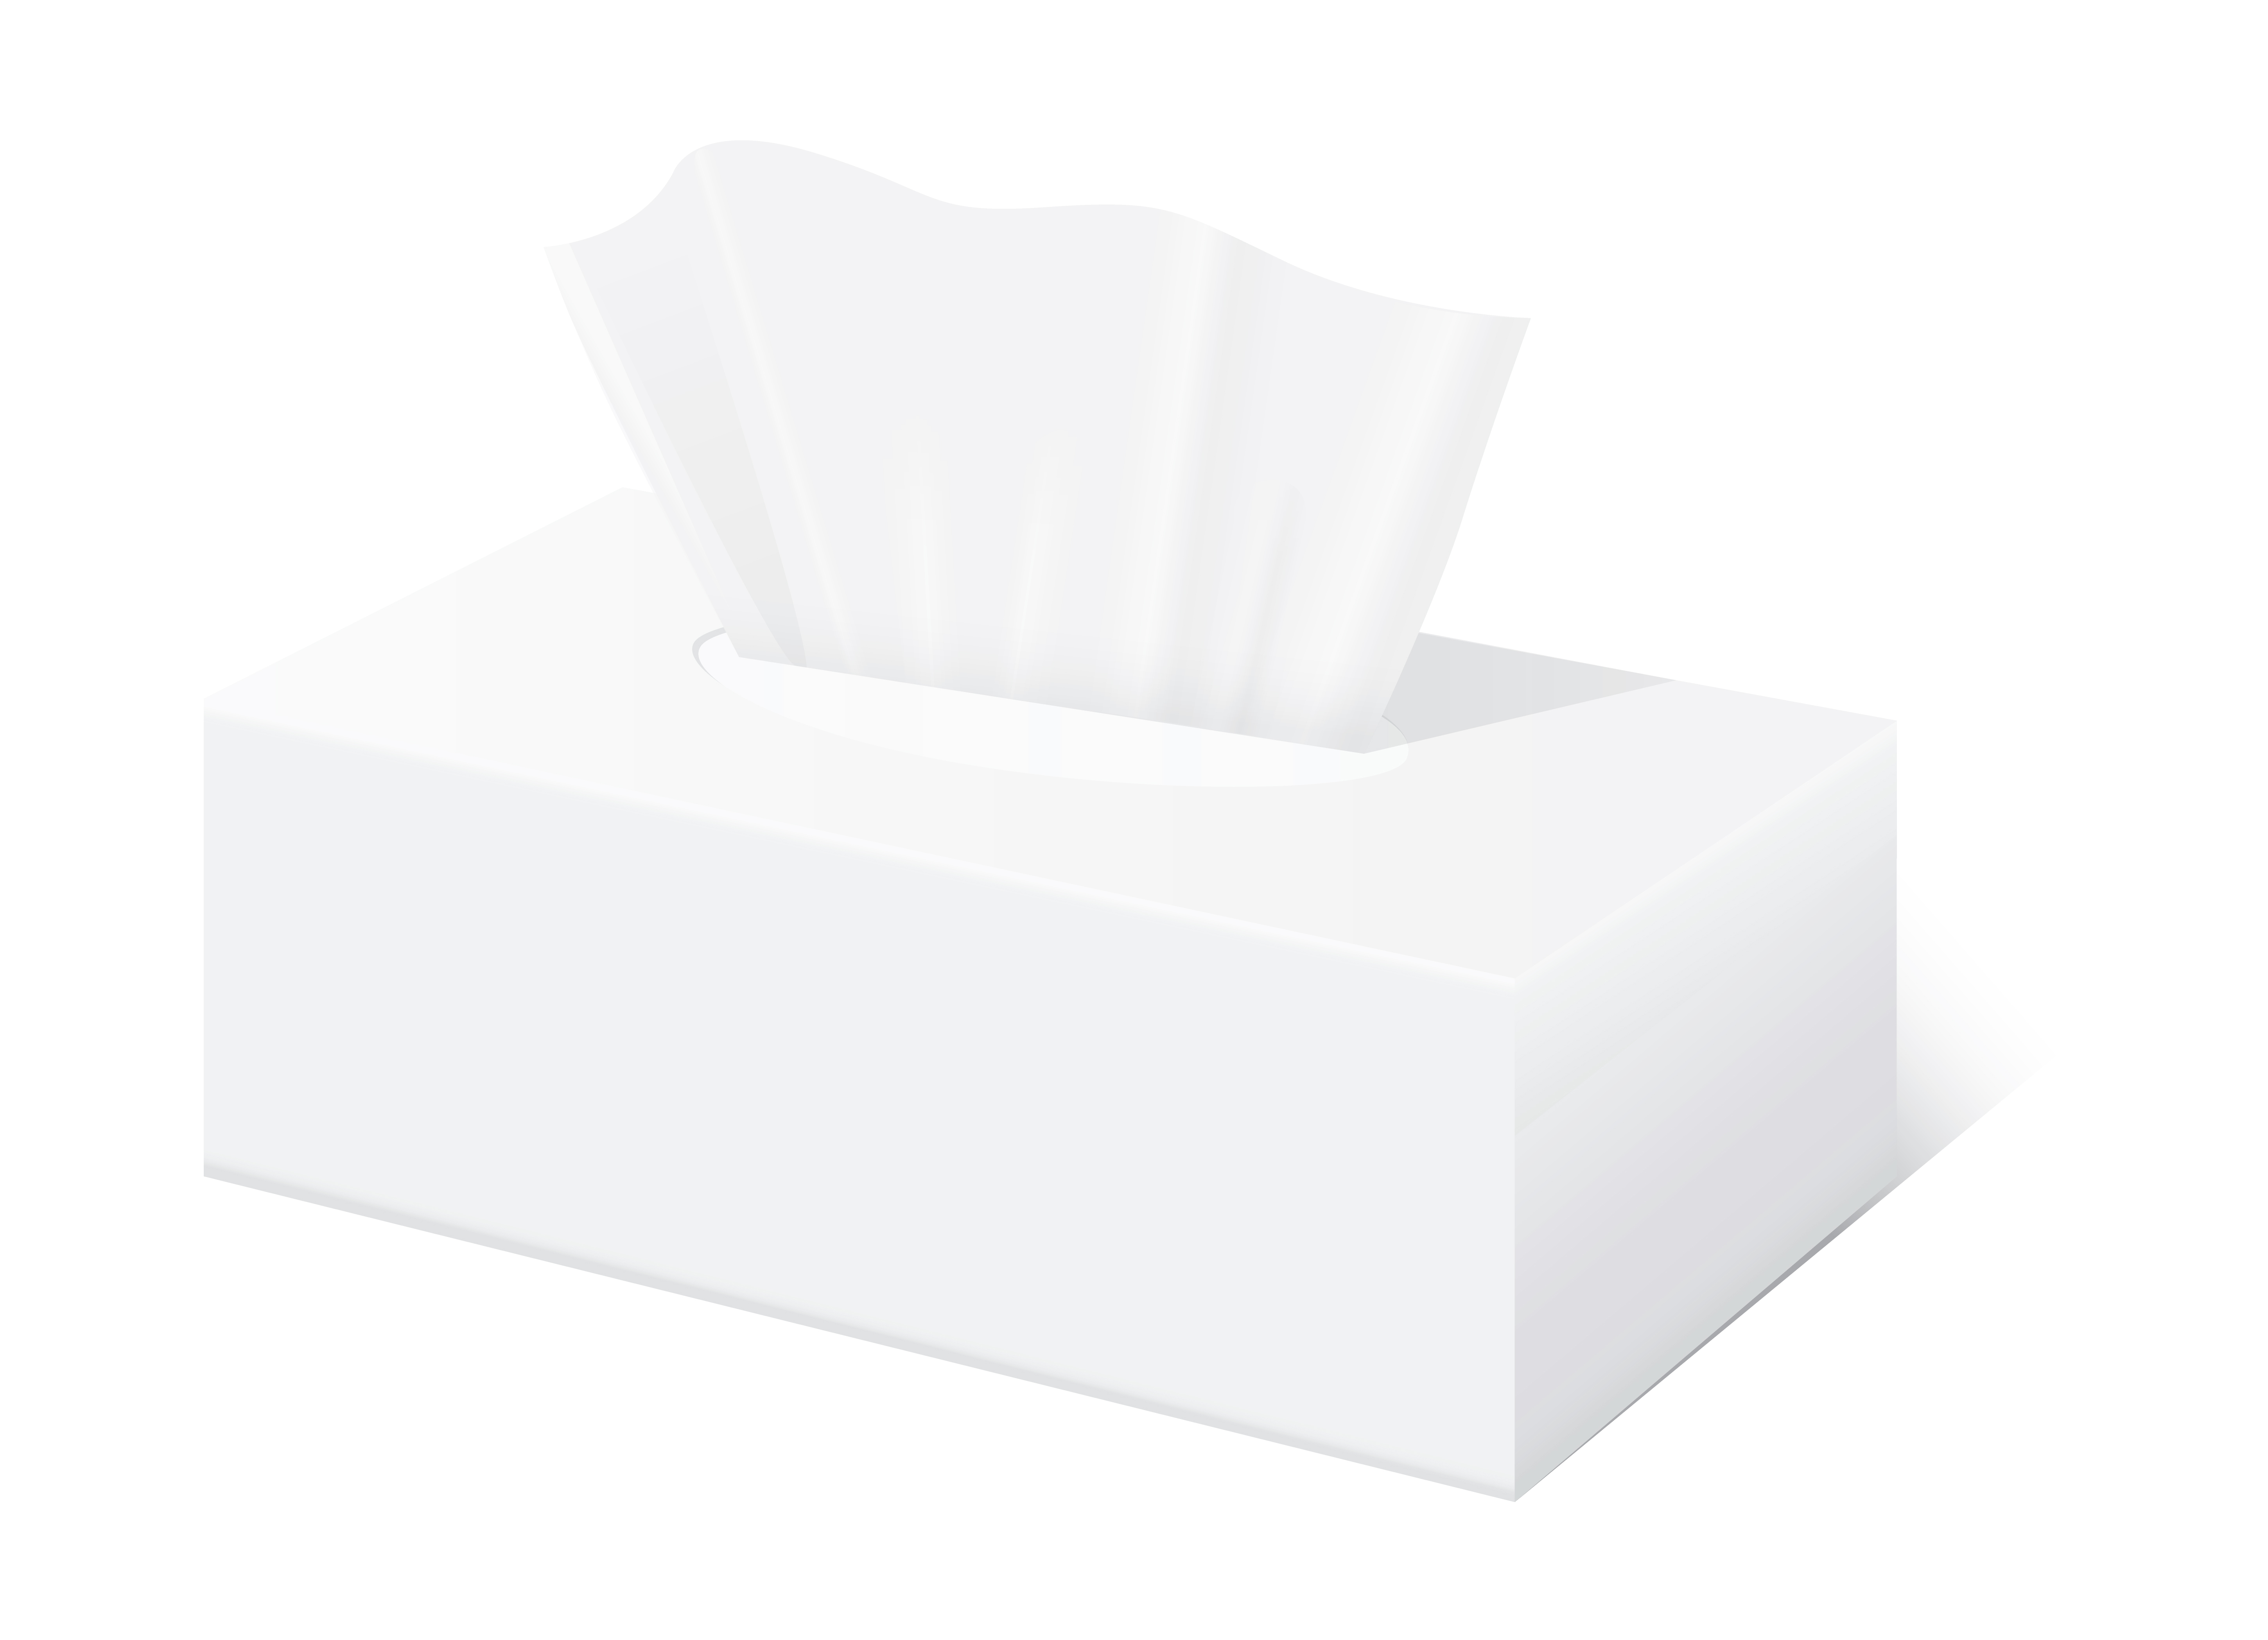 Keeps your tissues at the top of the box, where you need them!